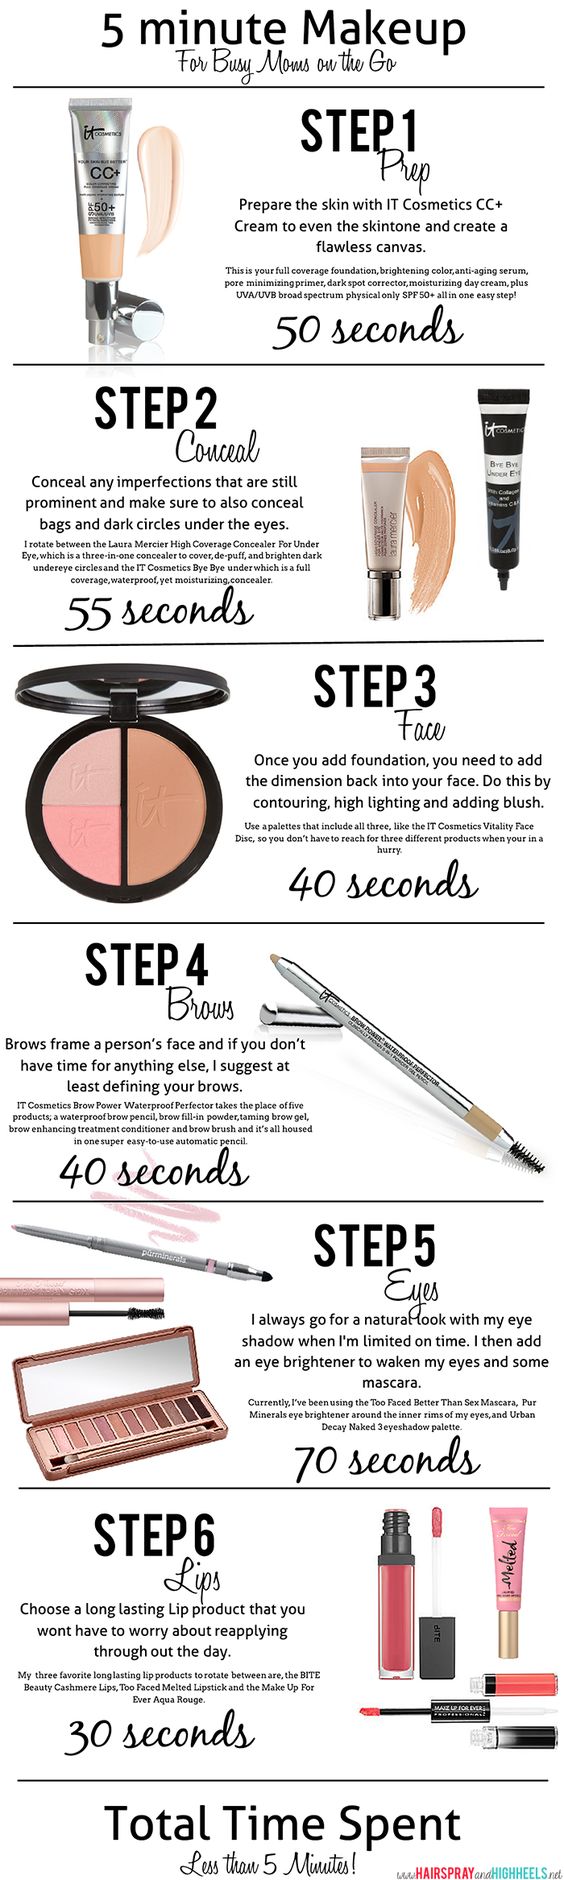 7 Unexpected Ways to Make Your Everyday Beauty Routine Easier - Her ...